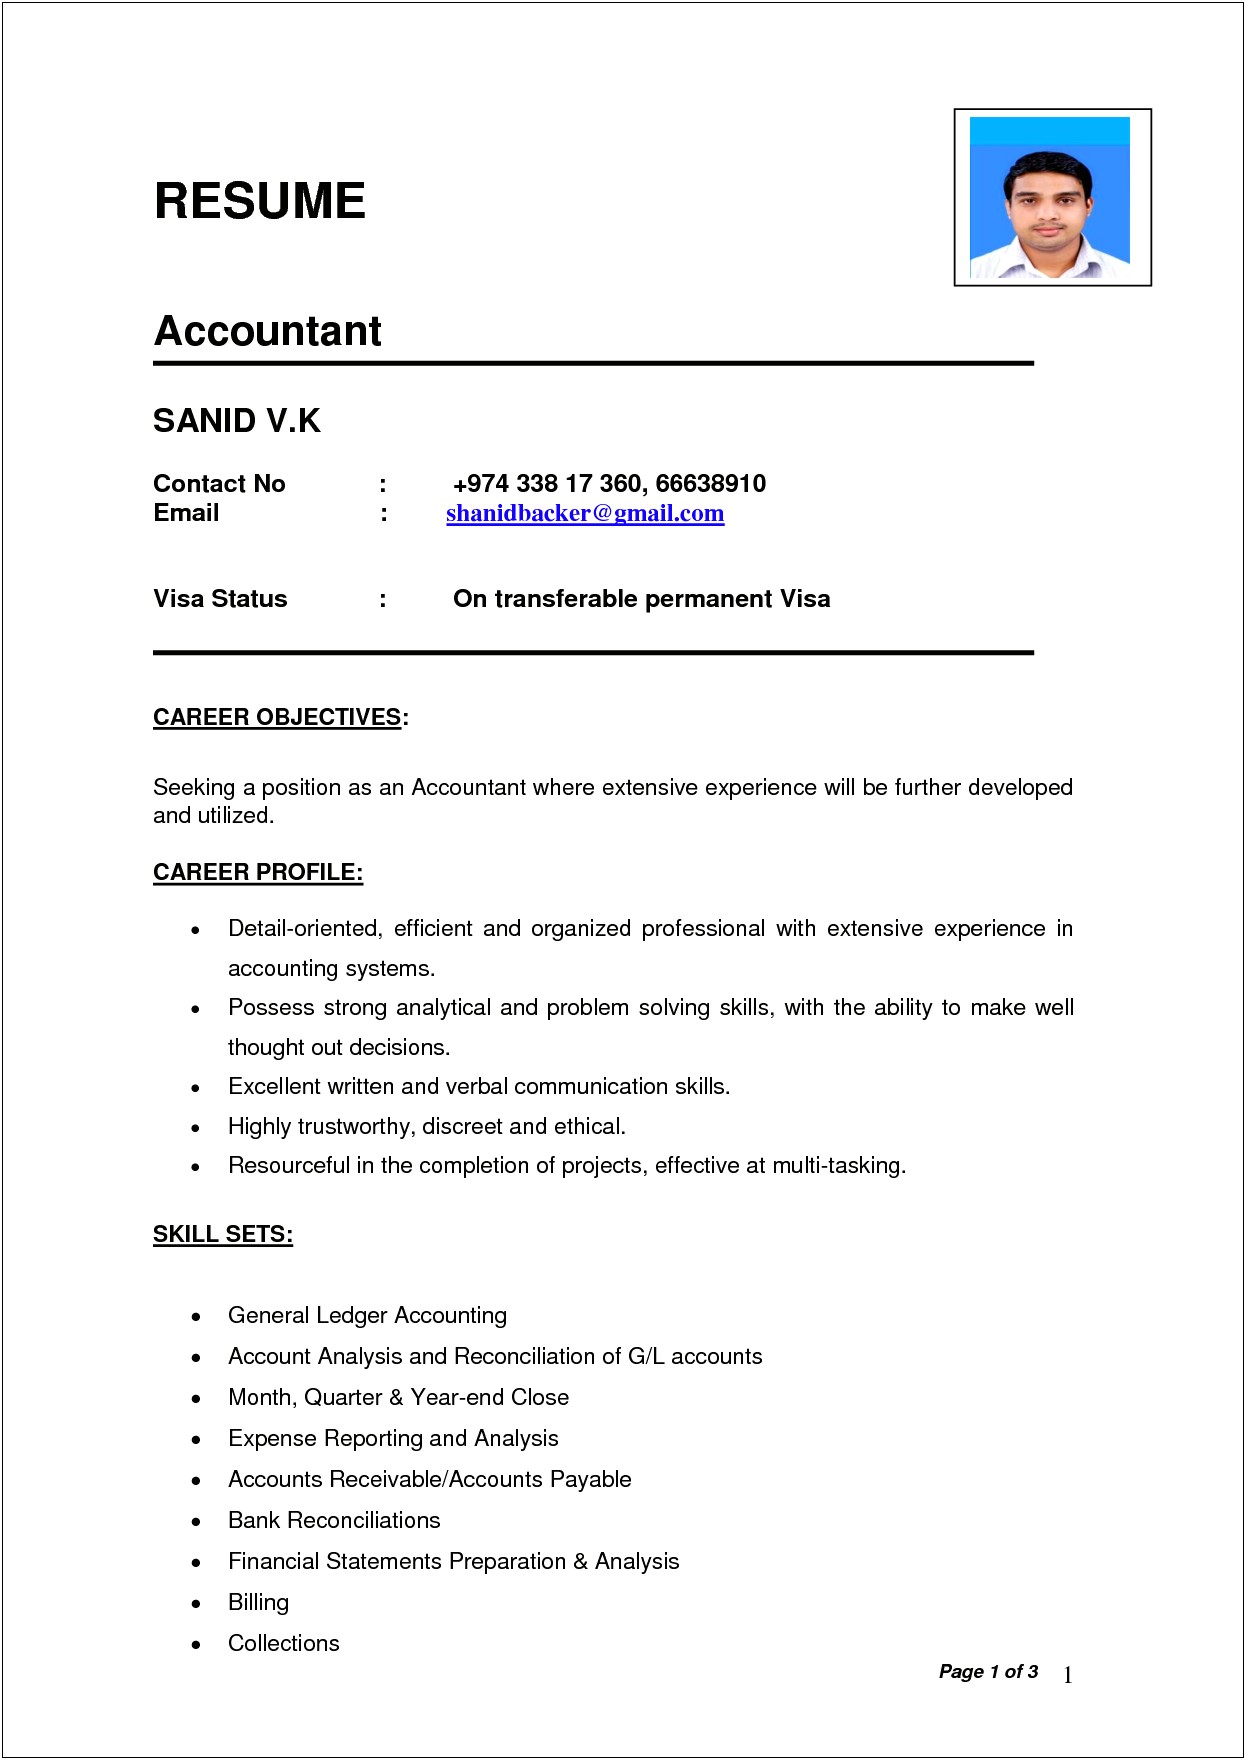 Resume For Accountant In Word Format For India